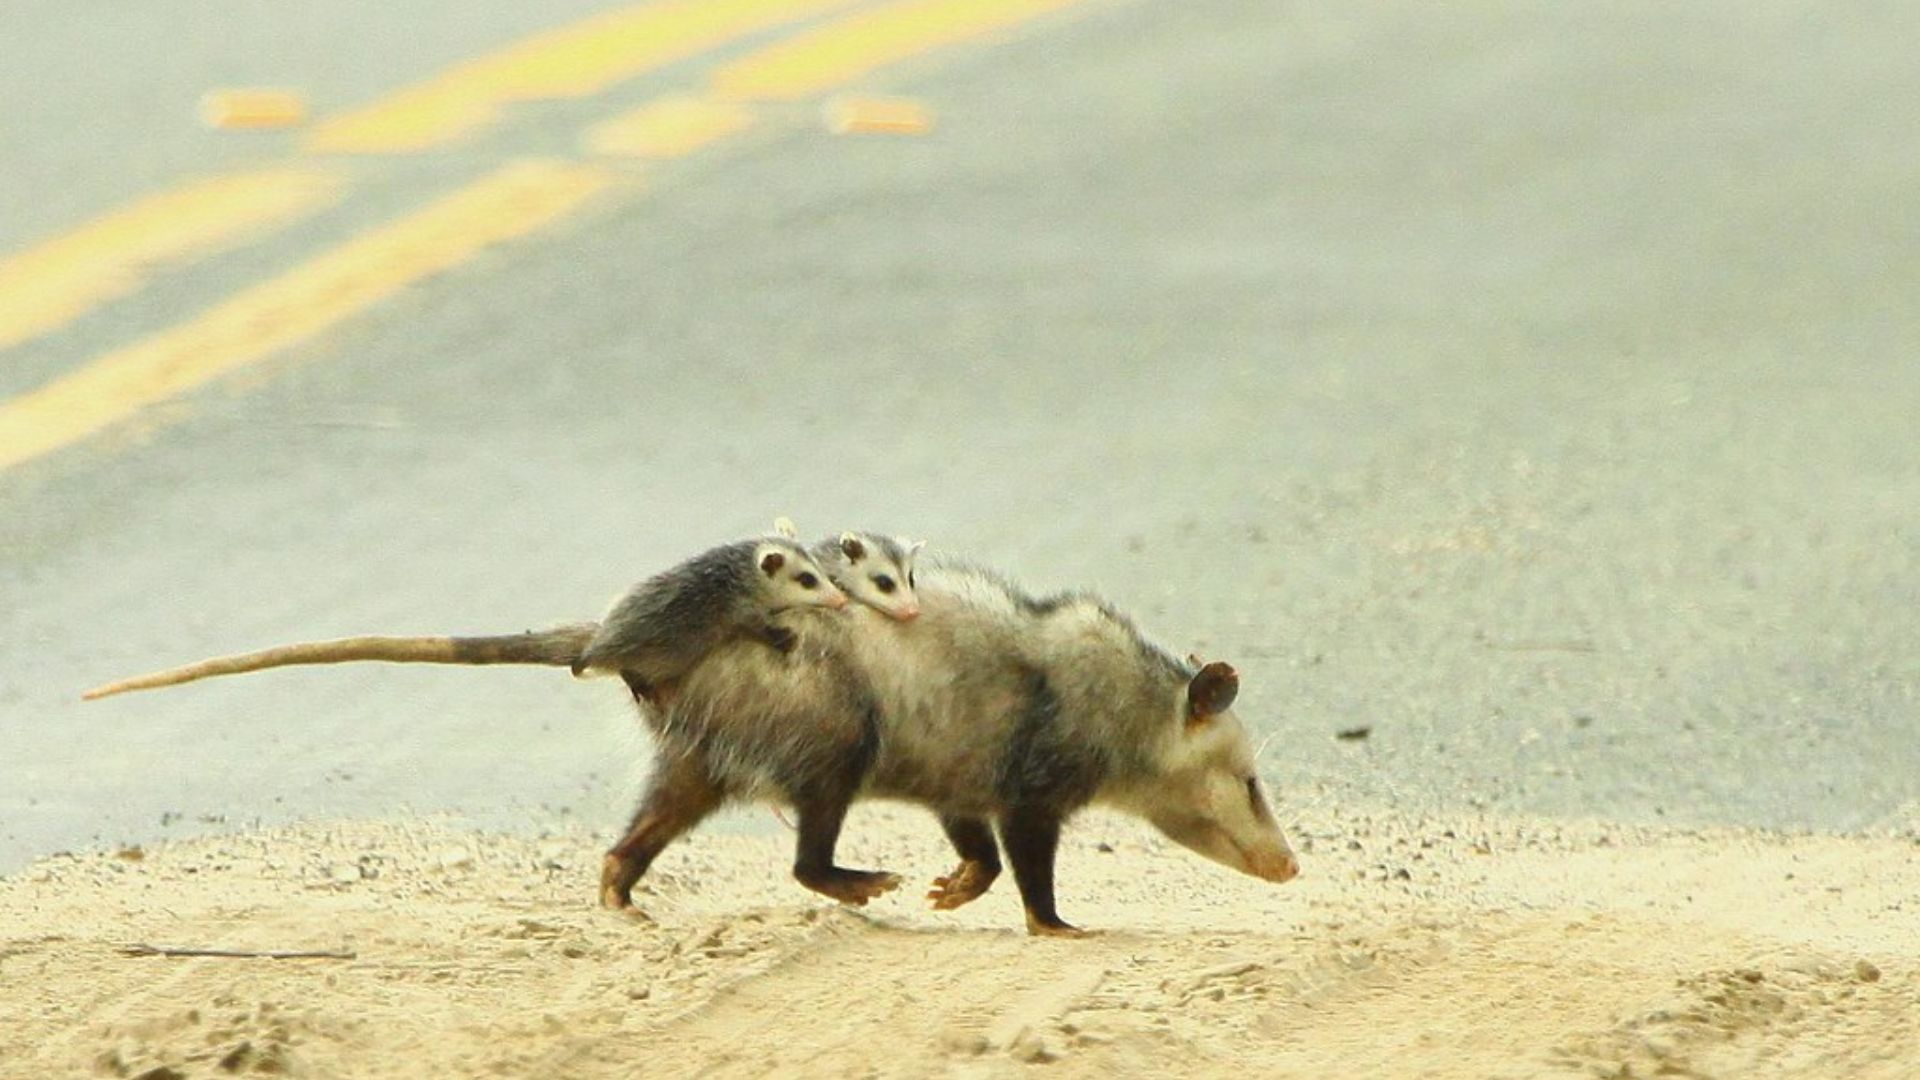 Why Did The Possum Cross The Road?